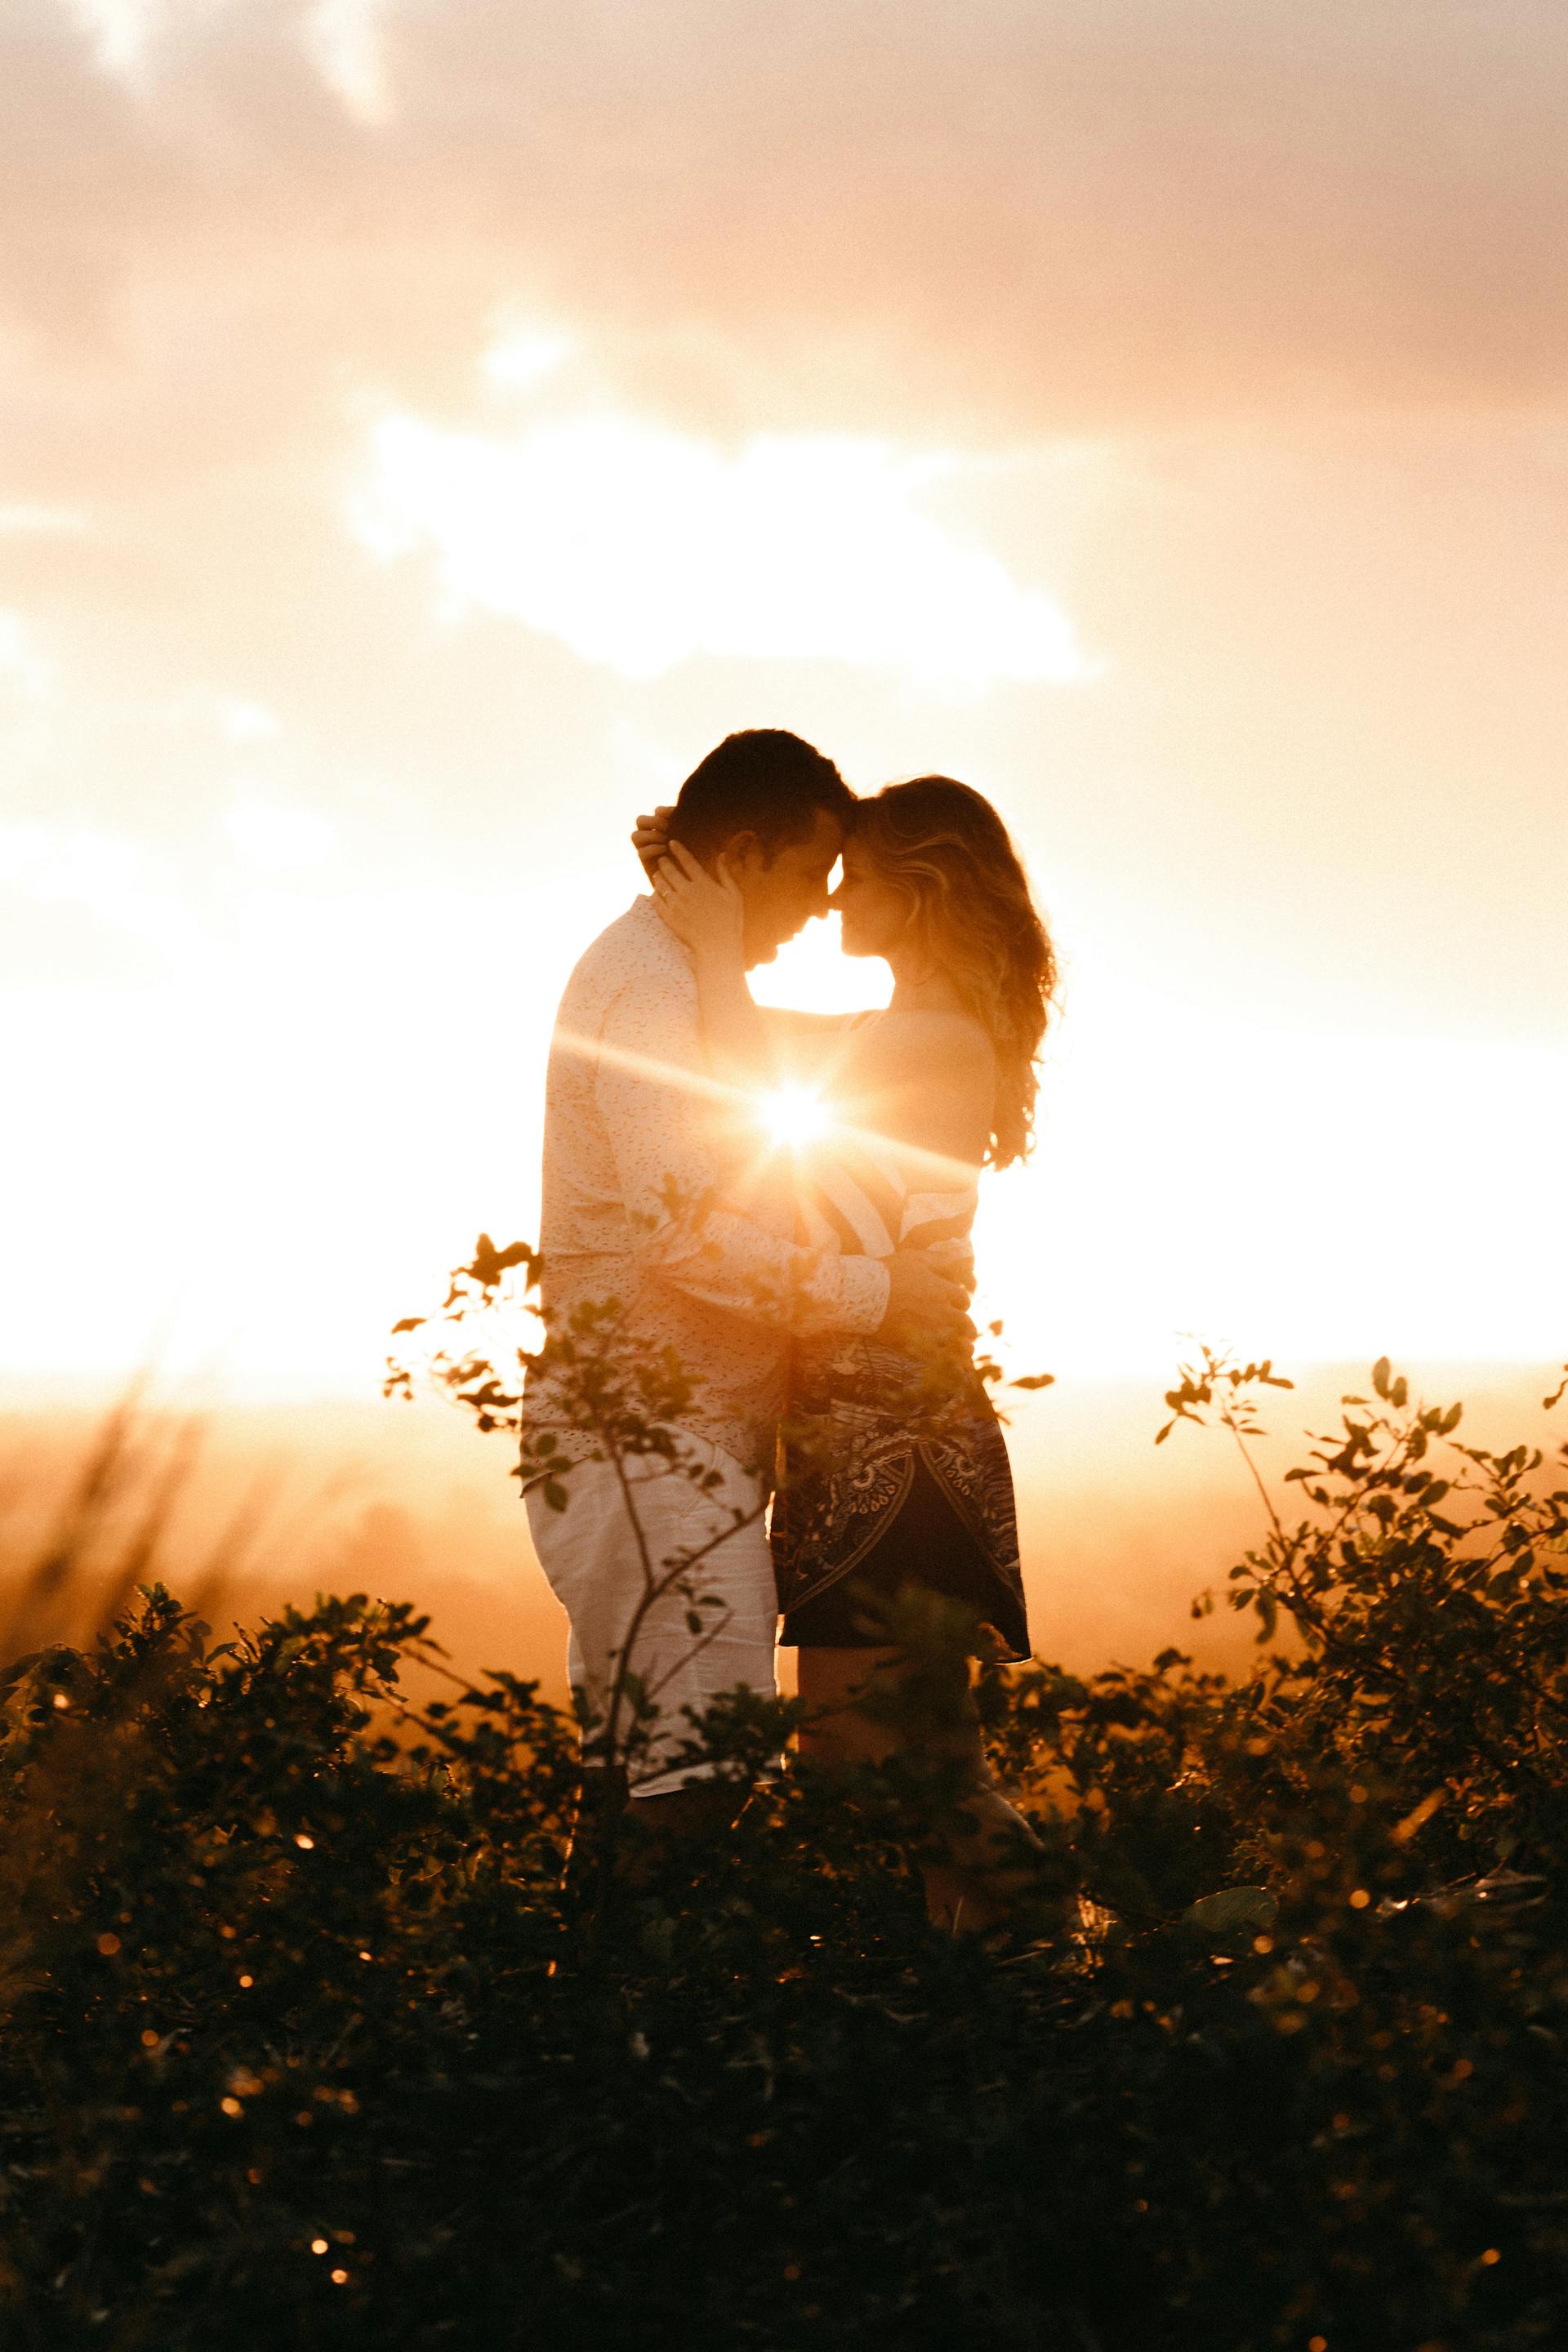 A couple hugging in a field during golden hour | Source: Pexels